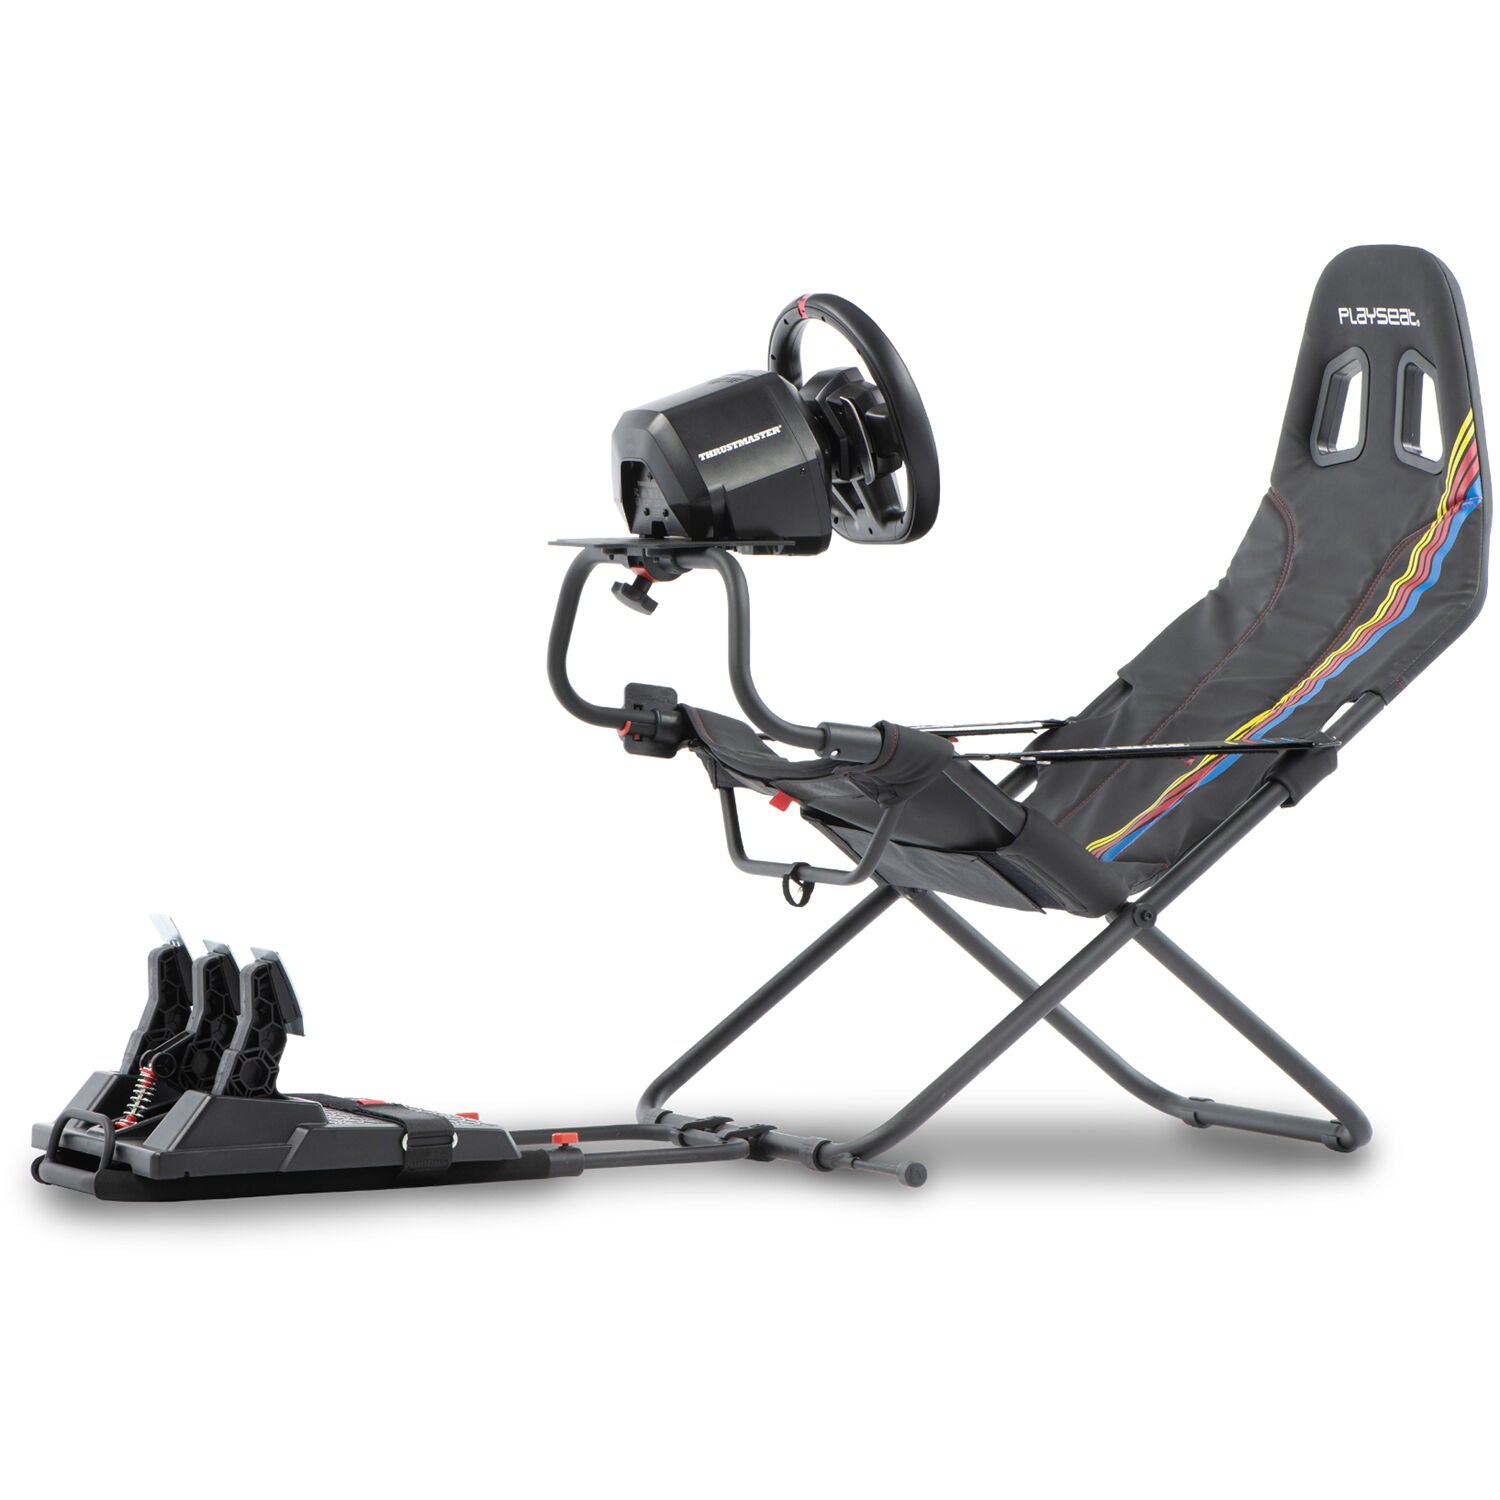 Playseat RN.00188 Challenge Foldable Adjustable High Performance Sim Racing Cockpit for PC and Console, Nascar Edition